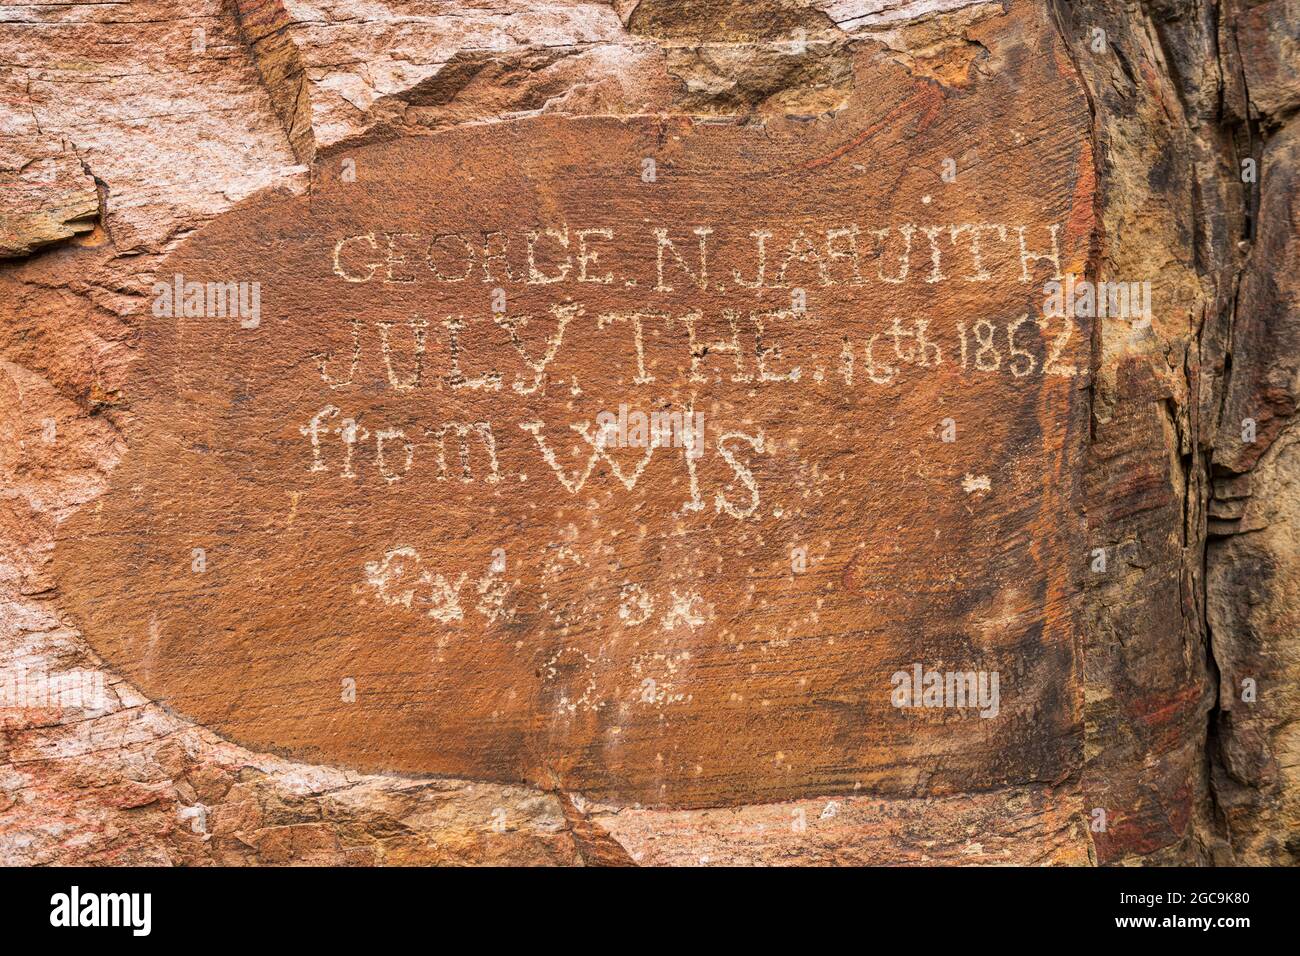 Pioneer Graffitti from 1852 in the High Rock Canyon in the Black Rock High Rock National Conservation Area, NV, 2020. Stock Photo